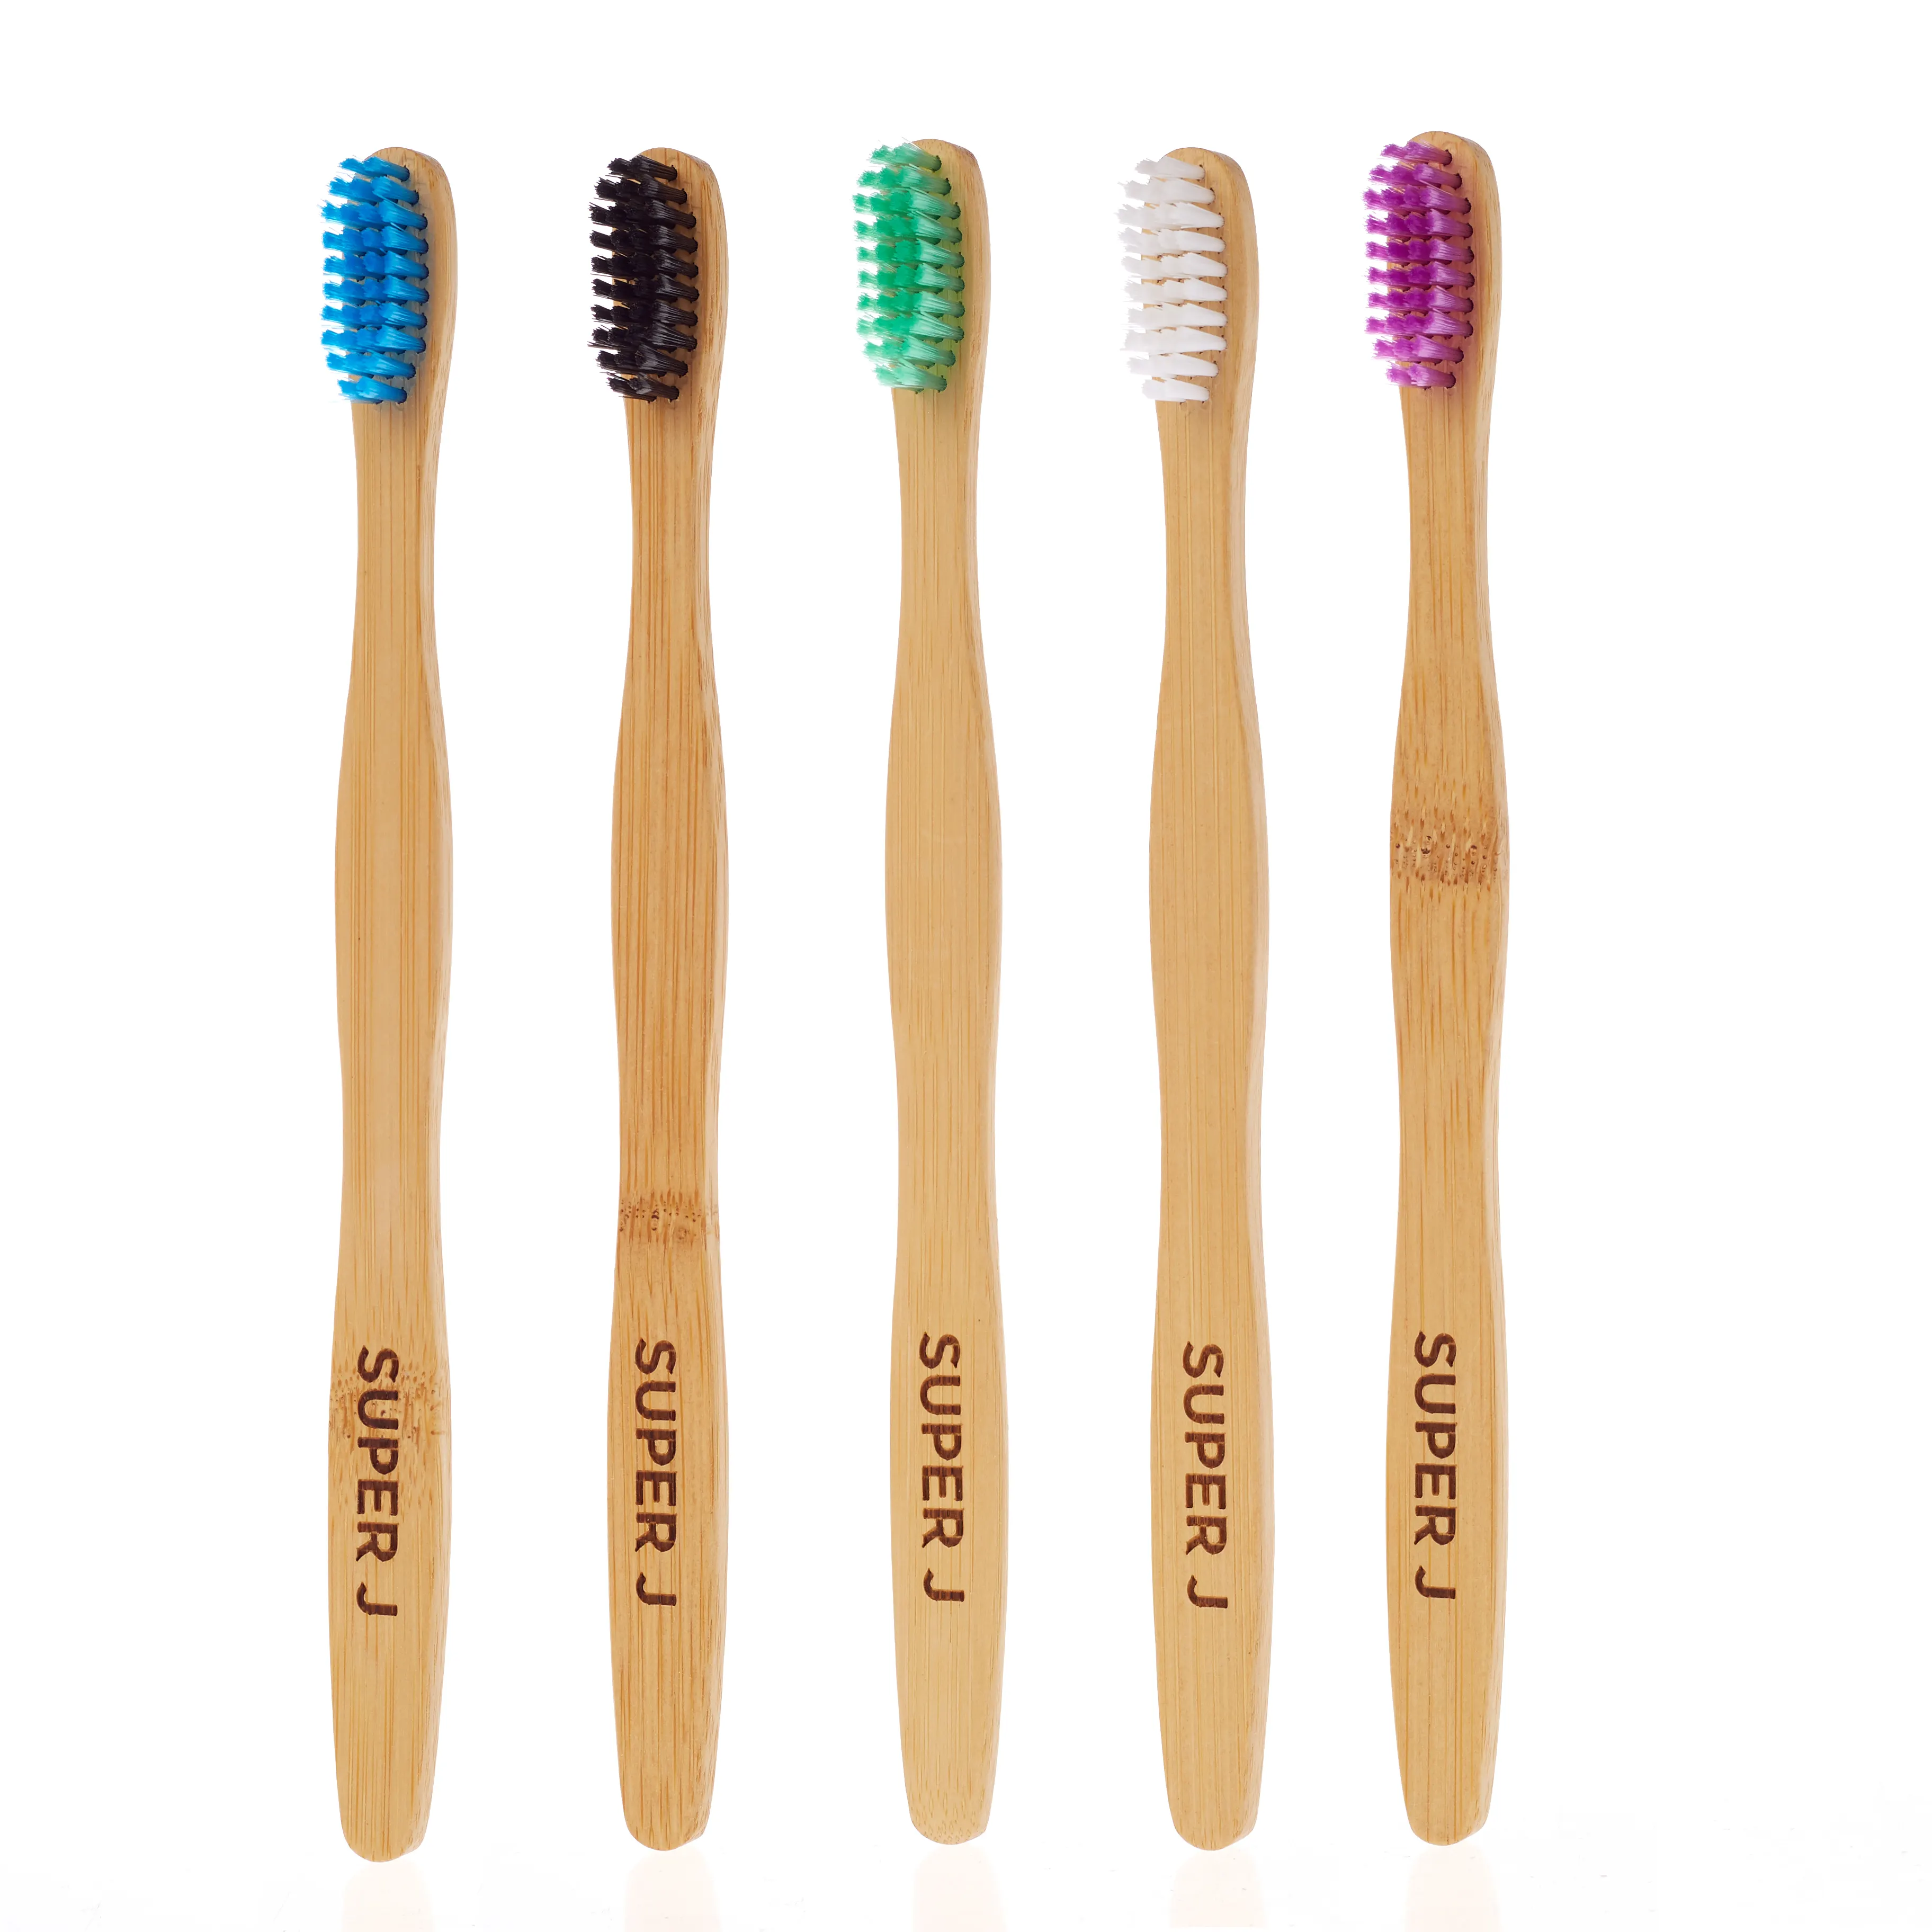 disposable biodegradable flat curved moso bamboo toothbrush for adults for home and travel use